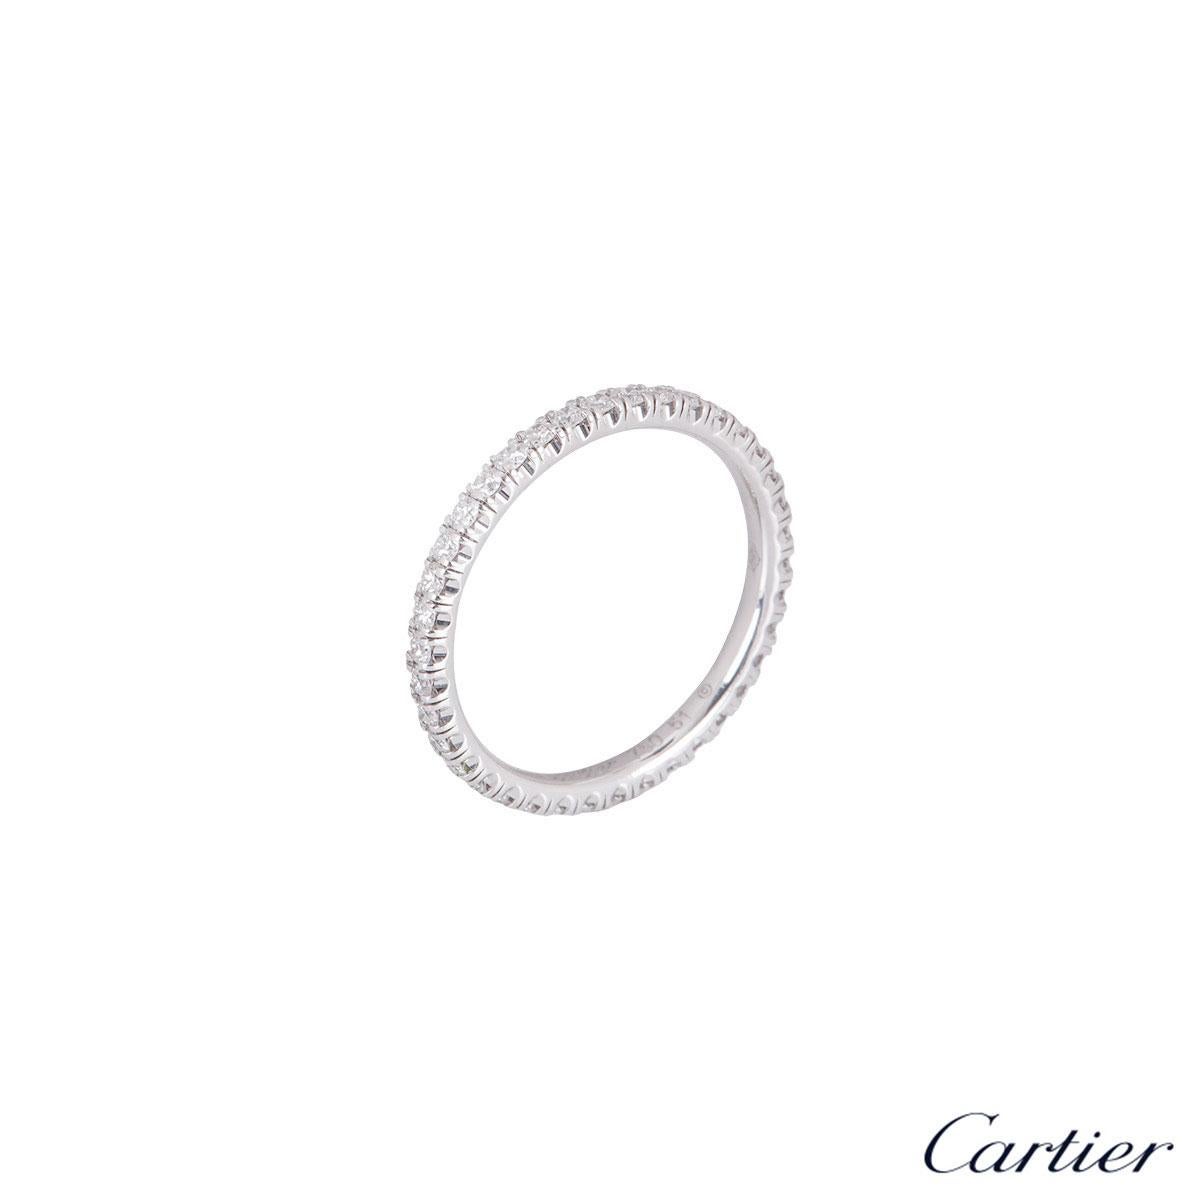 An alluring 18k white gold diamond eternity ring by Cartier from the Étincelle De Cartier collection. The ring comprises of 38 round brilliant cut diamonds with a weight of 0.47ct in a shared 4 claw setting all the way round. The ring is a size UK L